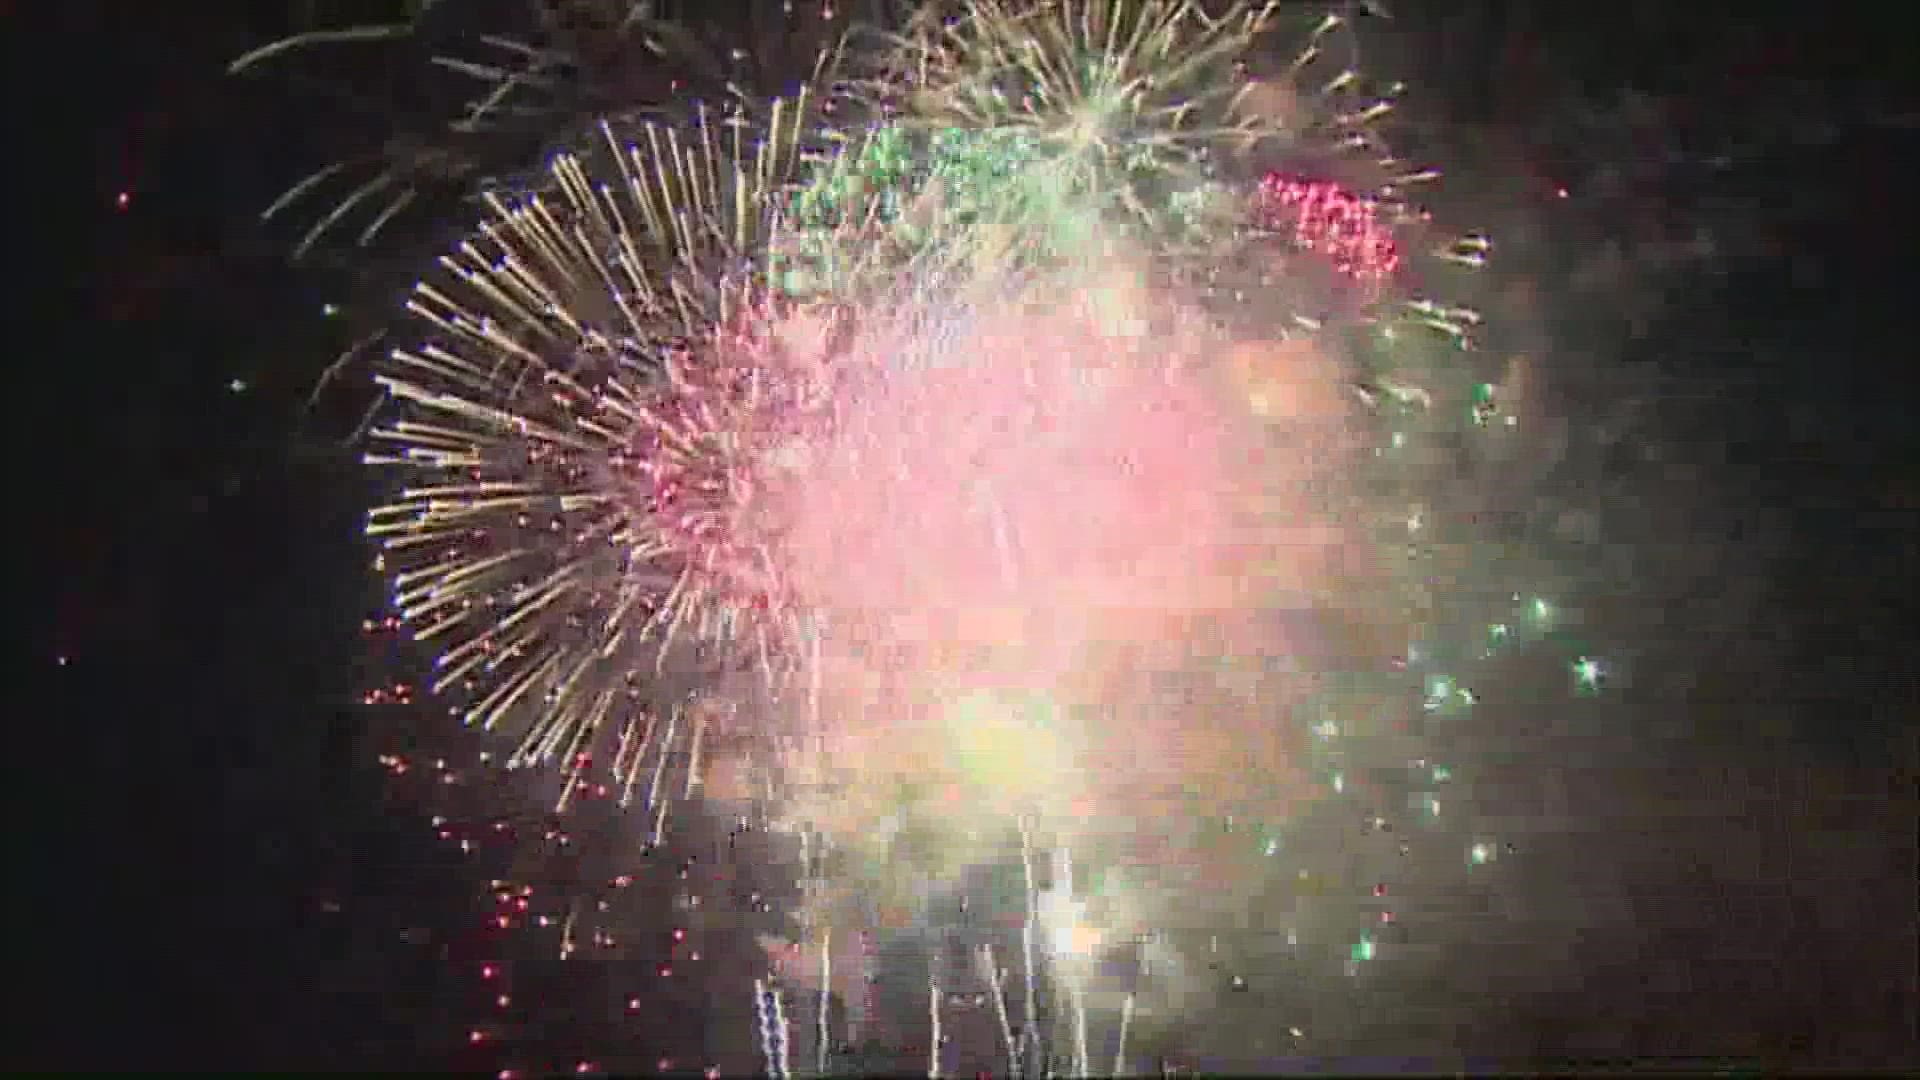 We spoke to organizers of one of the biggest fireworks shows in North Texas about how they pull it off.